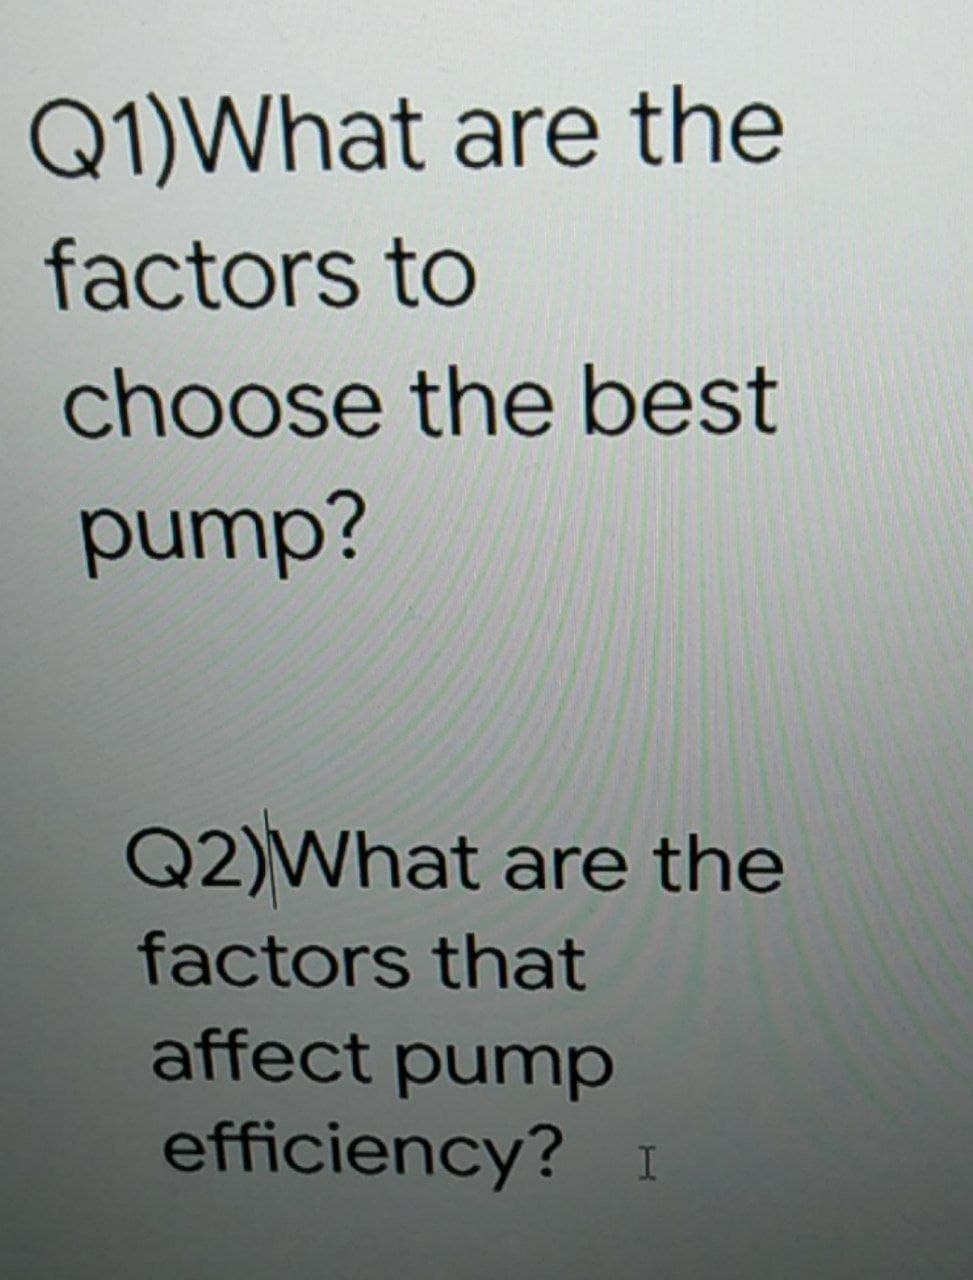 Q1)What are the
factors to
choose the best
pump?
Q2)What are the
factors that
affect pump
efficiency? I
